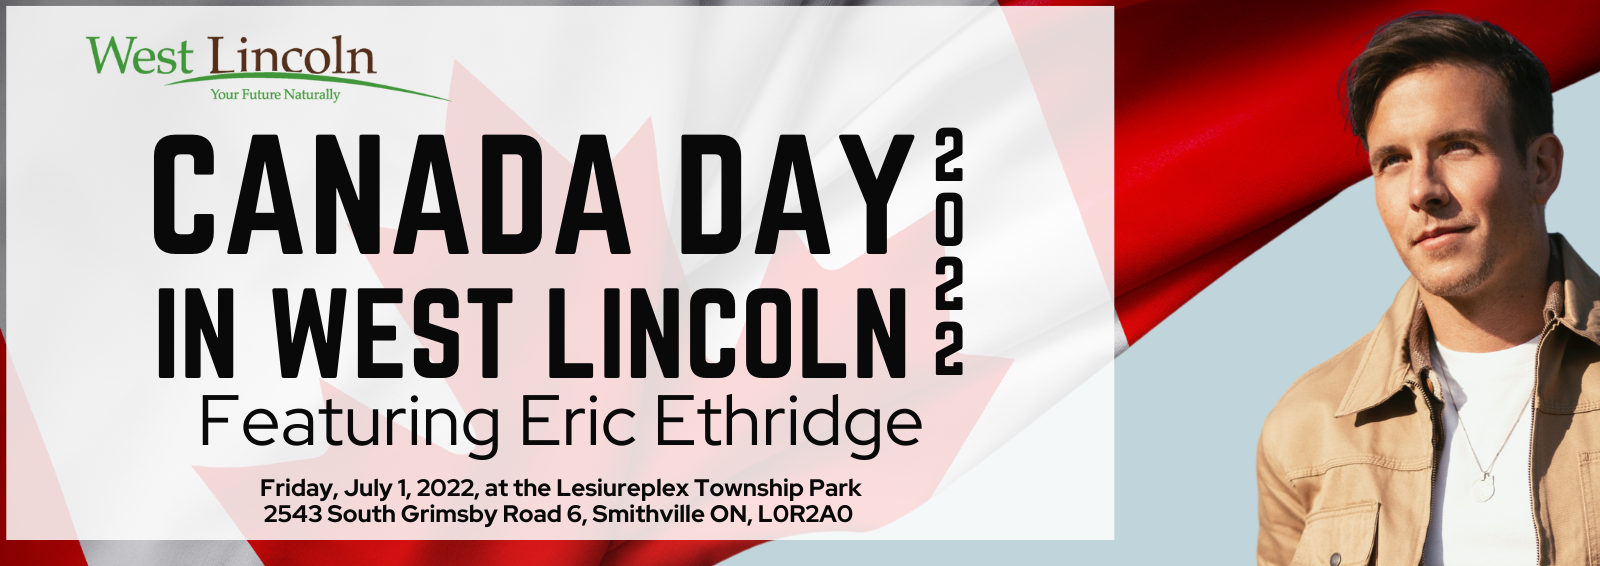 Canada Day 2022 in West Lincoln featuring Eric Ethridge and a photo of the musician Eric Ethridge and the Township of West Lincoln logo